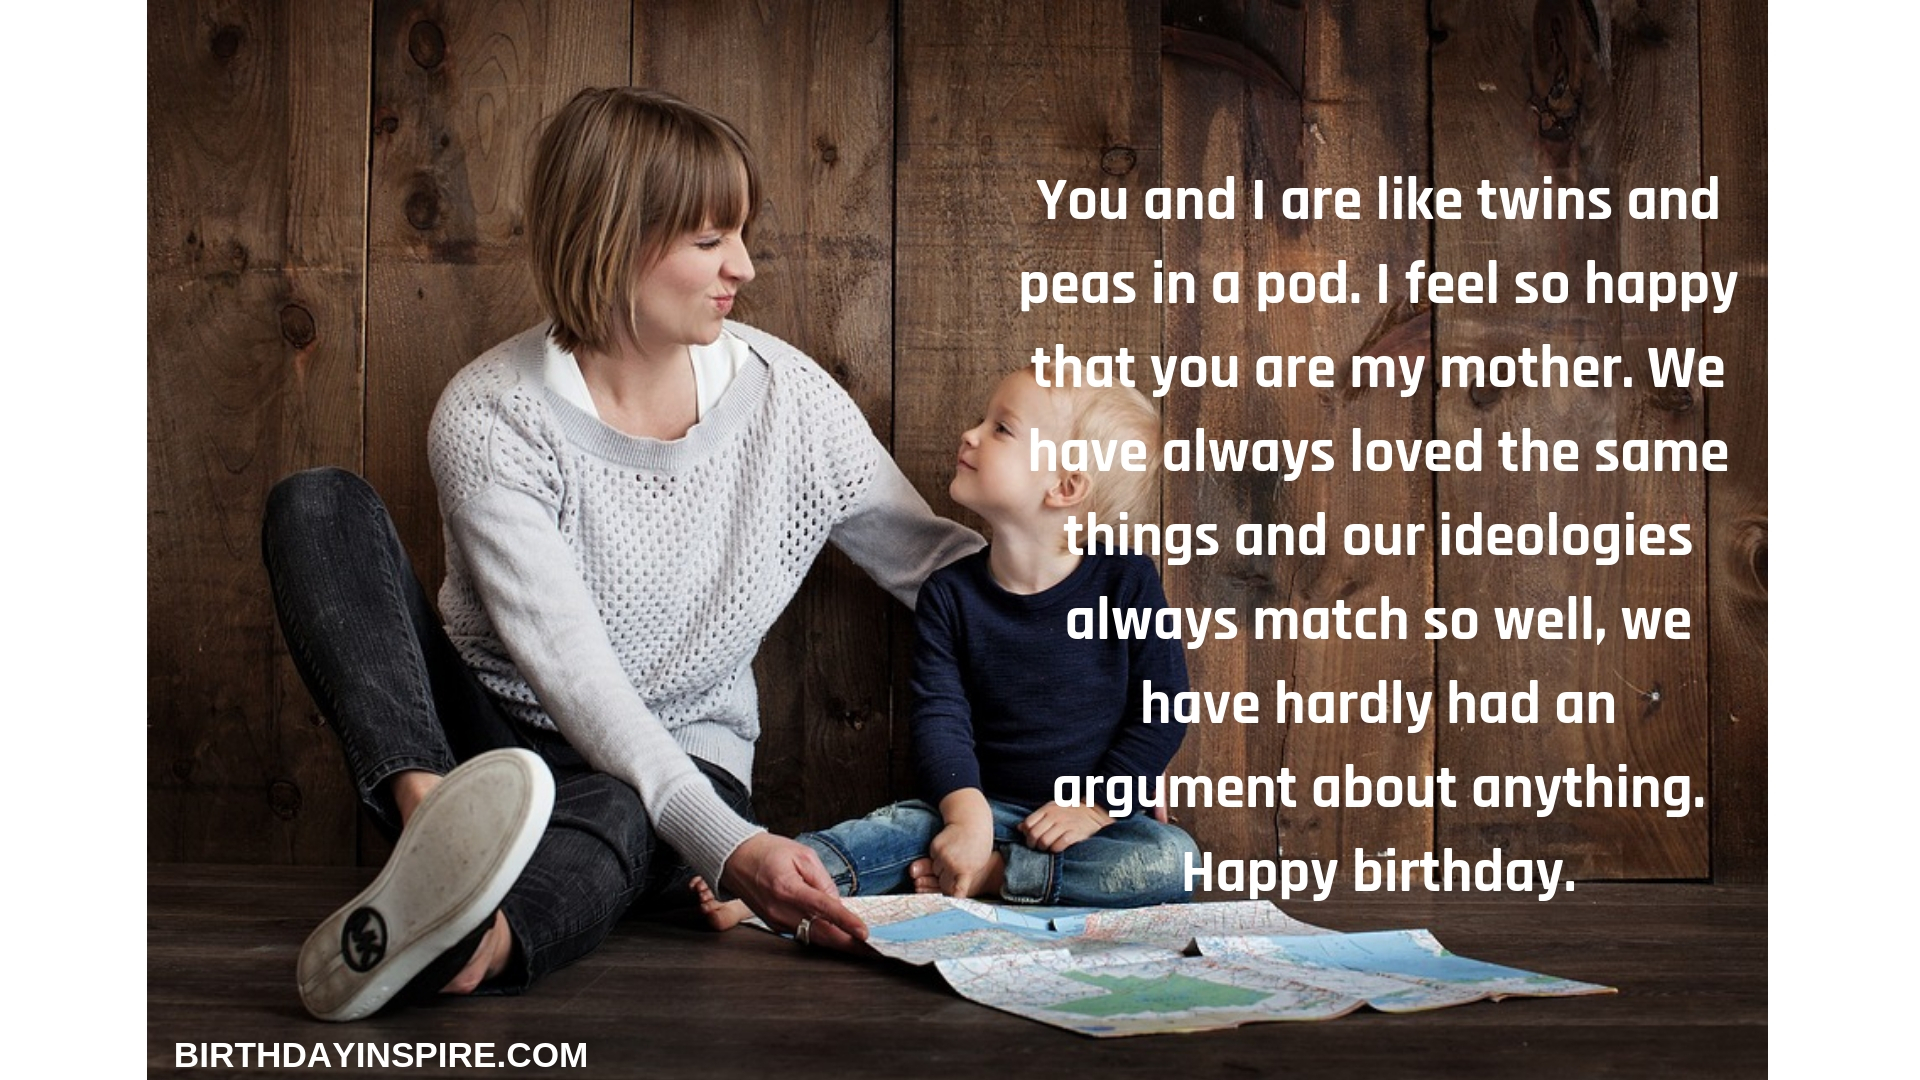 BIRTHDAY WISHES FOR MOM FROM DAUGHTER 